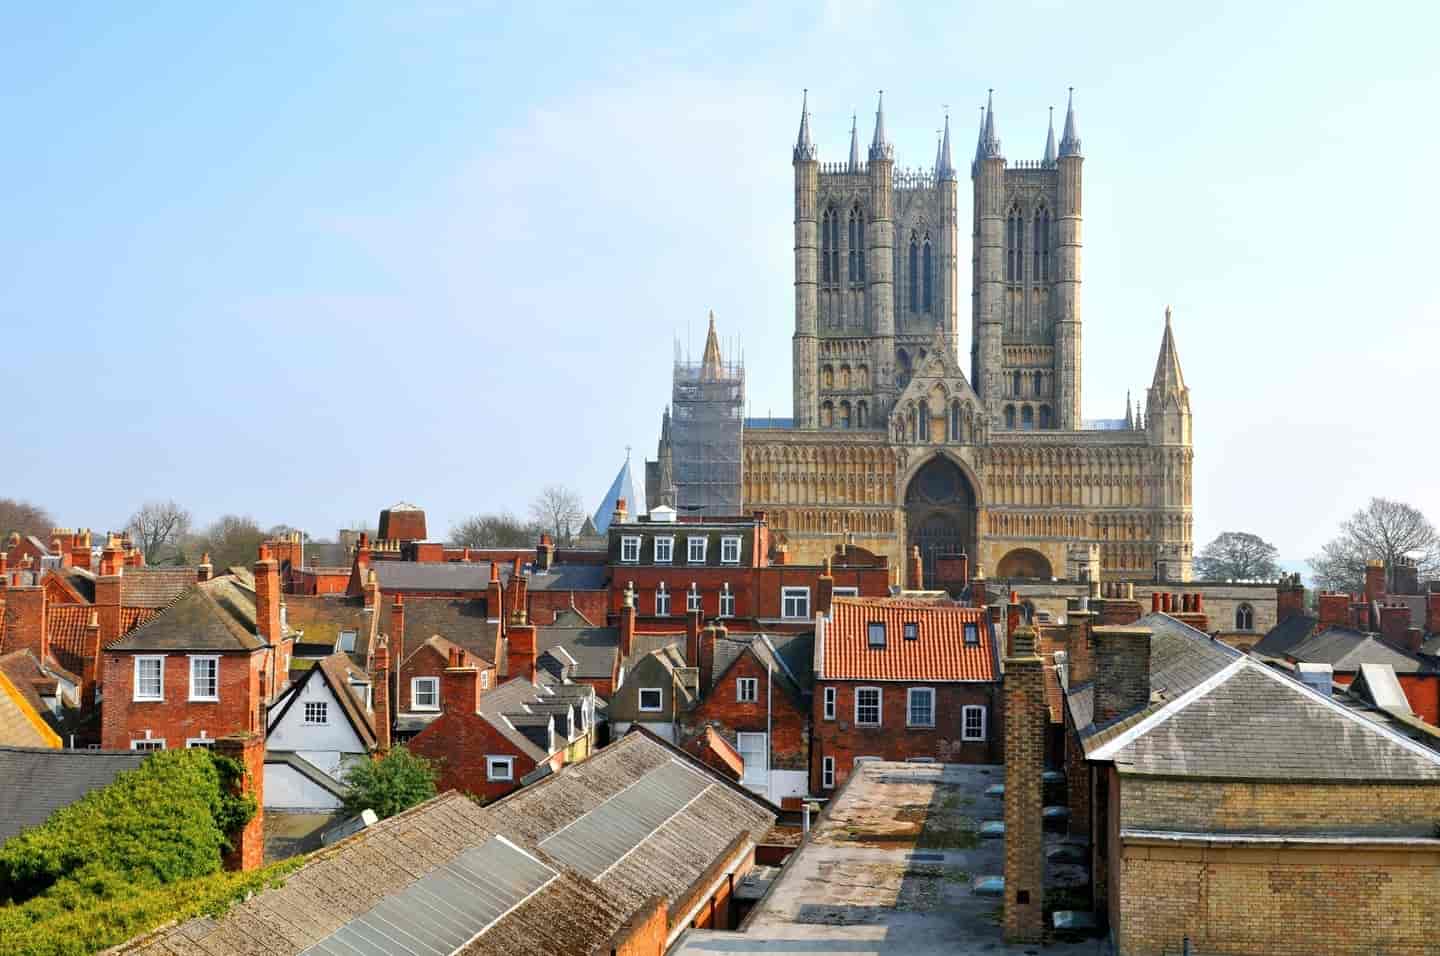 Student Accommodation in Lincoln - Lincoln Cathedral on a clear day